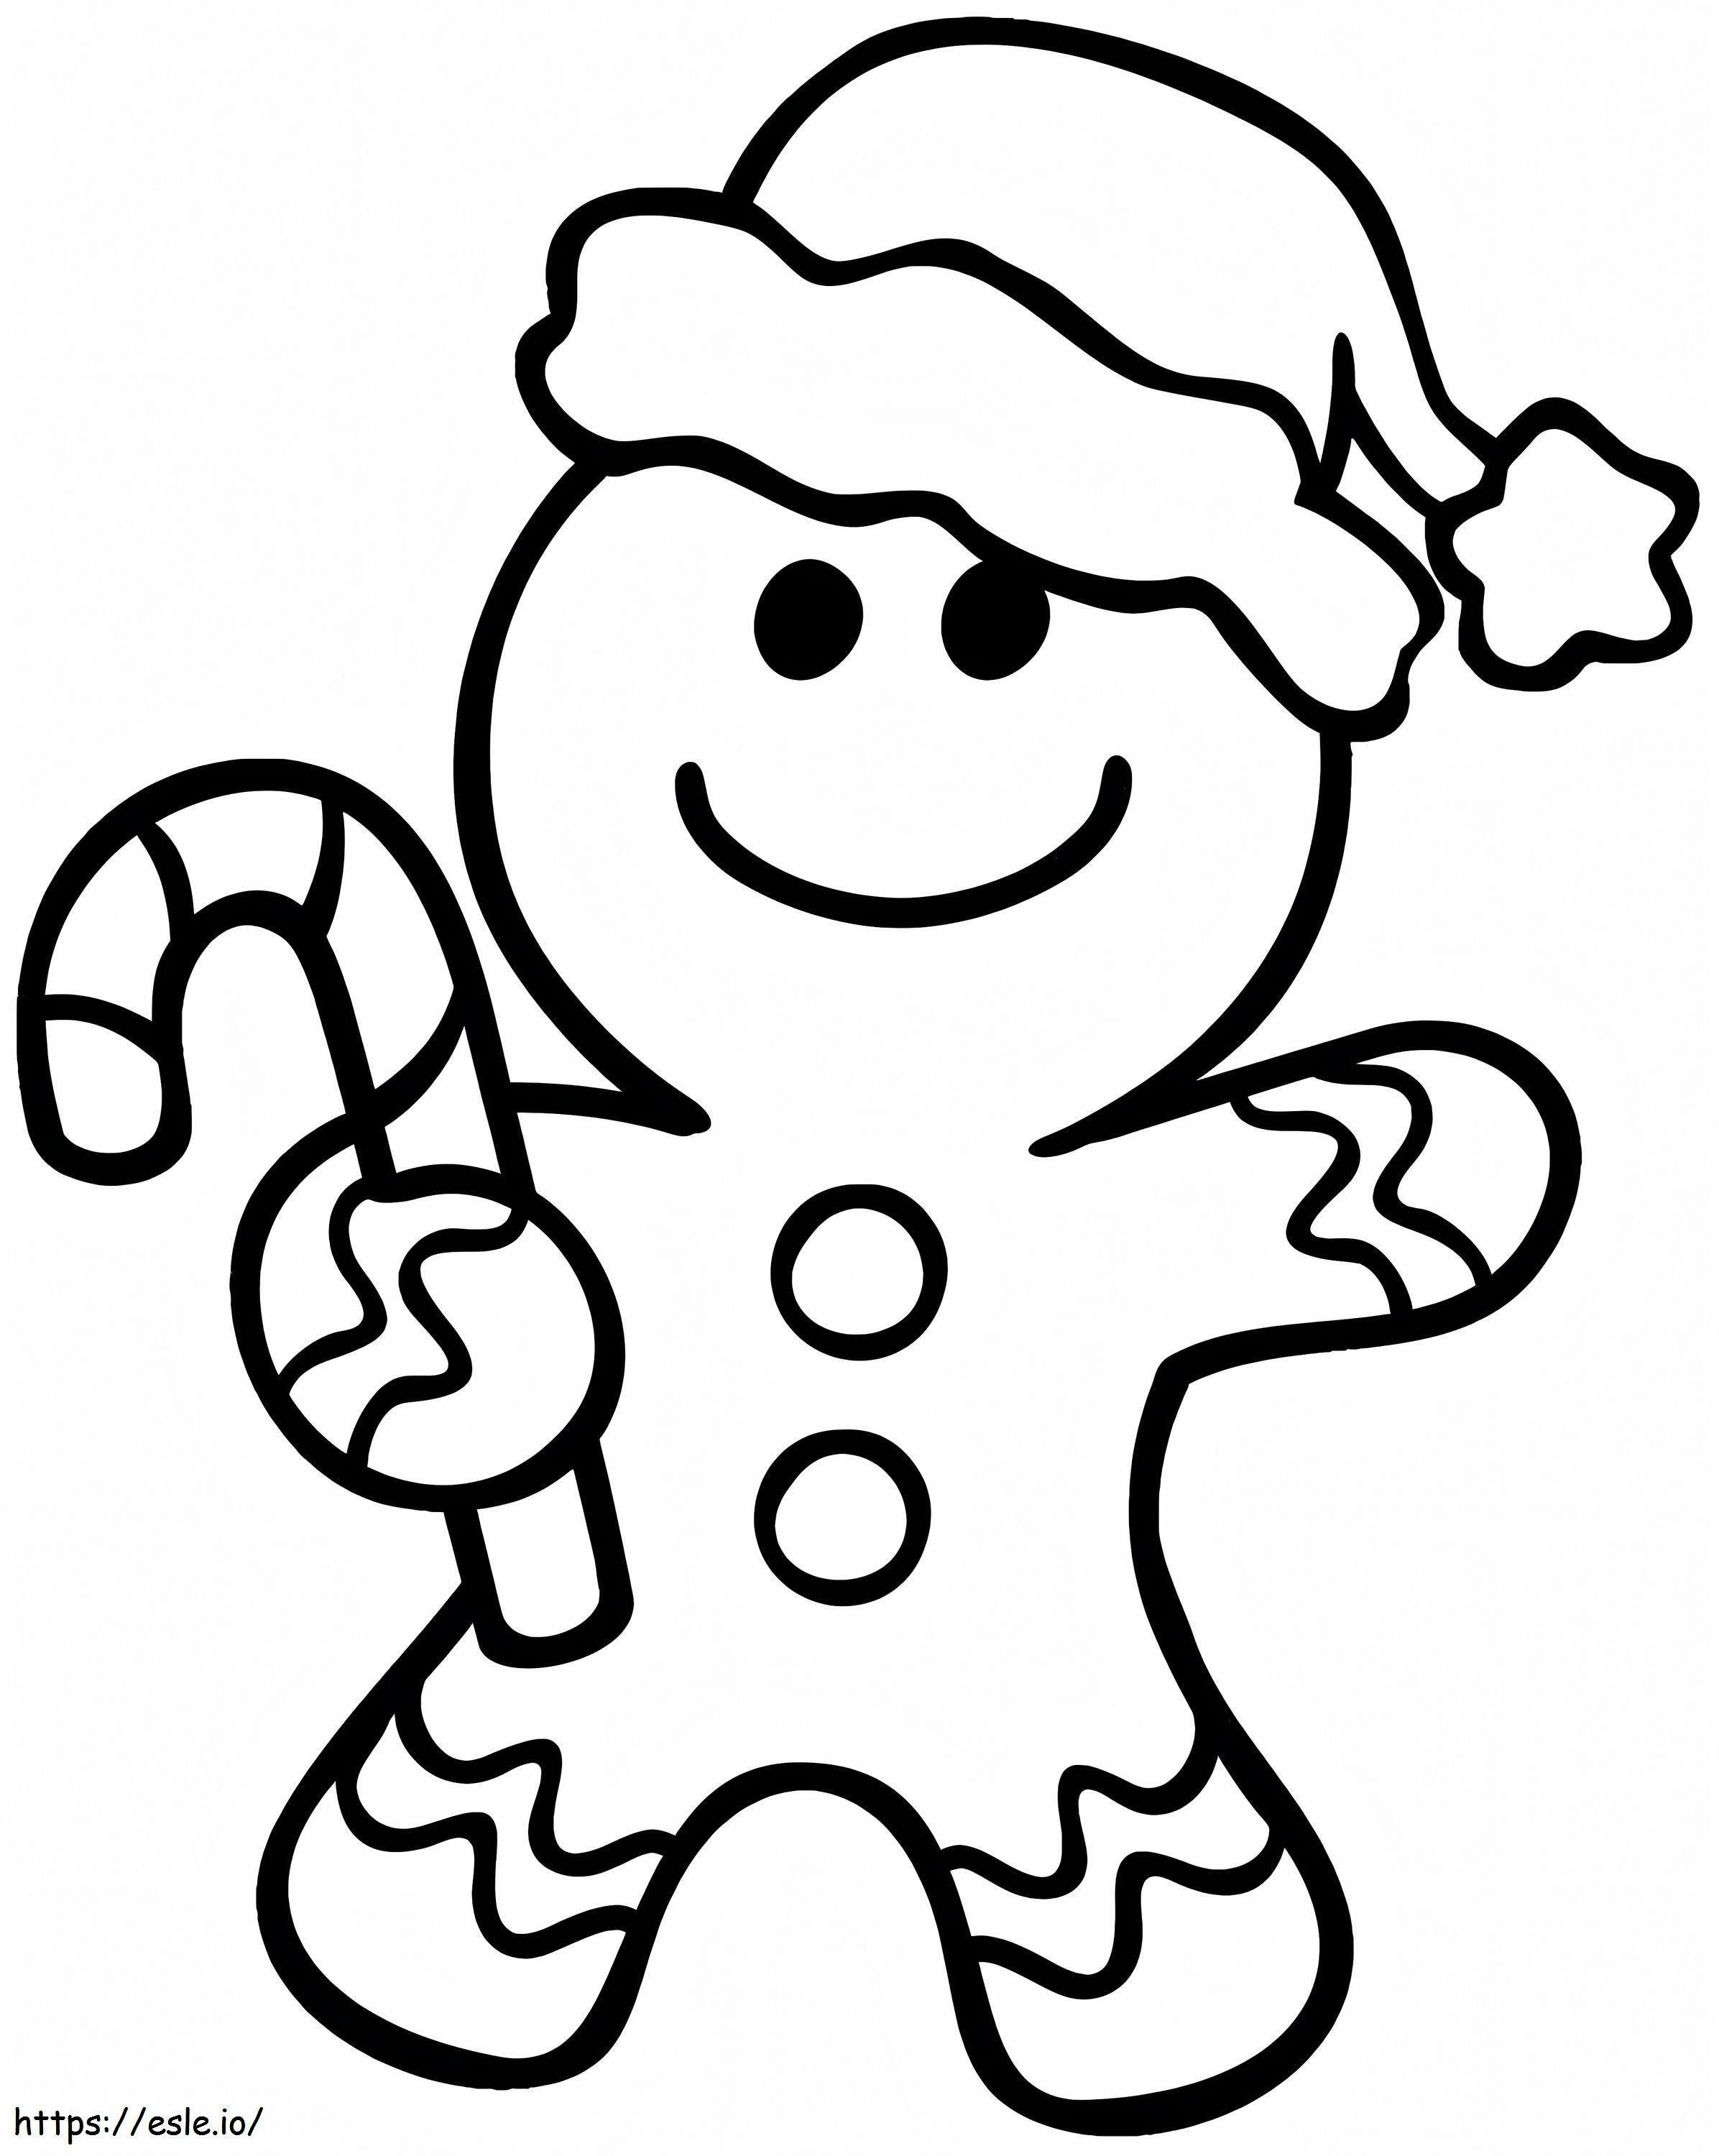 Gingerbread Man With Christmas Hat coloring page